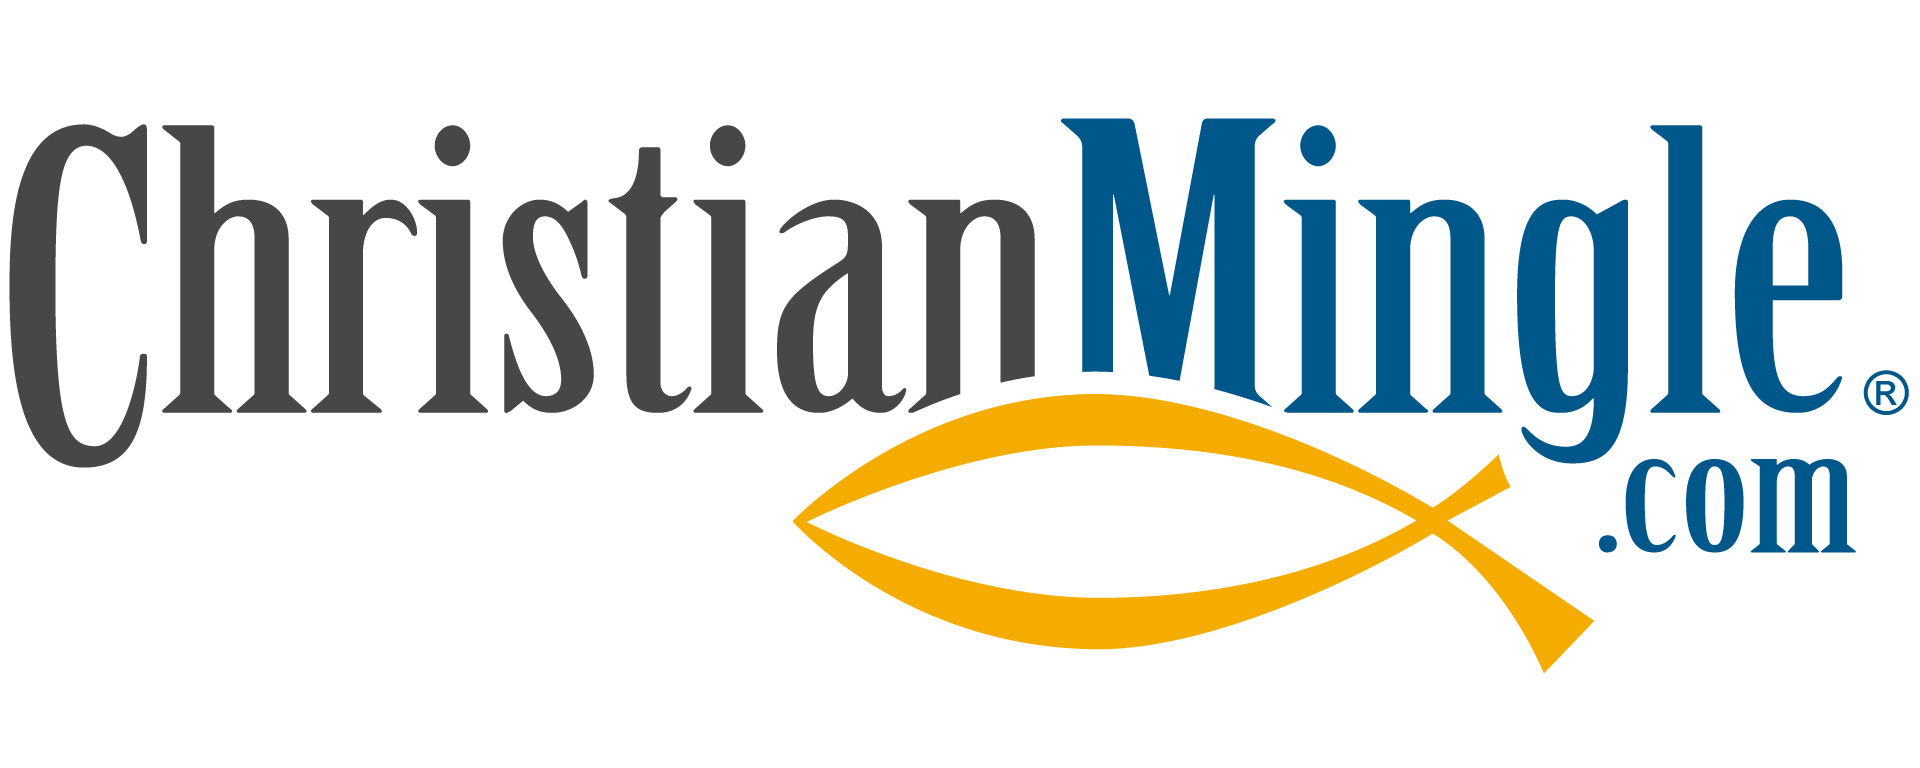 Christian matchmaking sites online